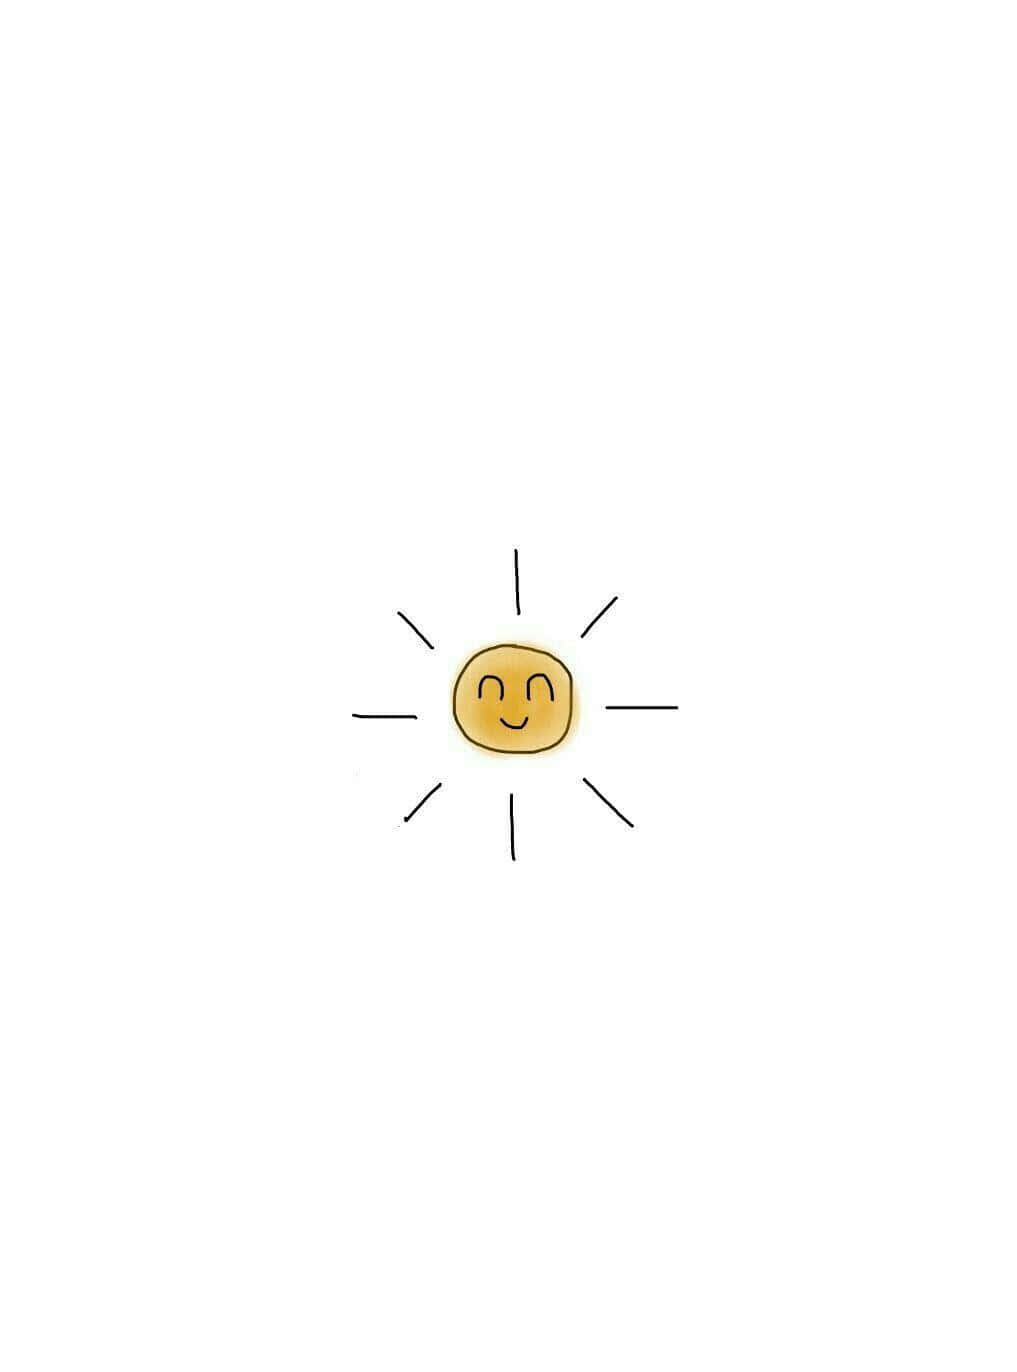 Look at this cute and happy sun! Wallpaper